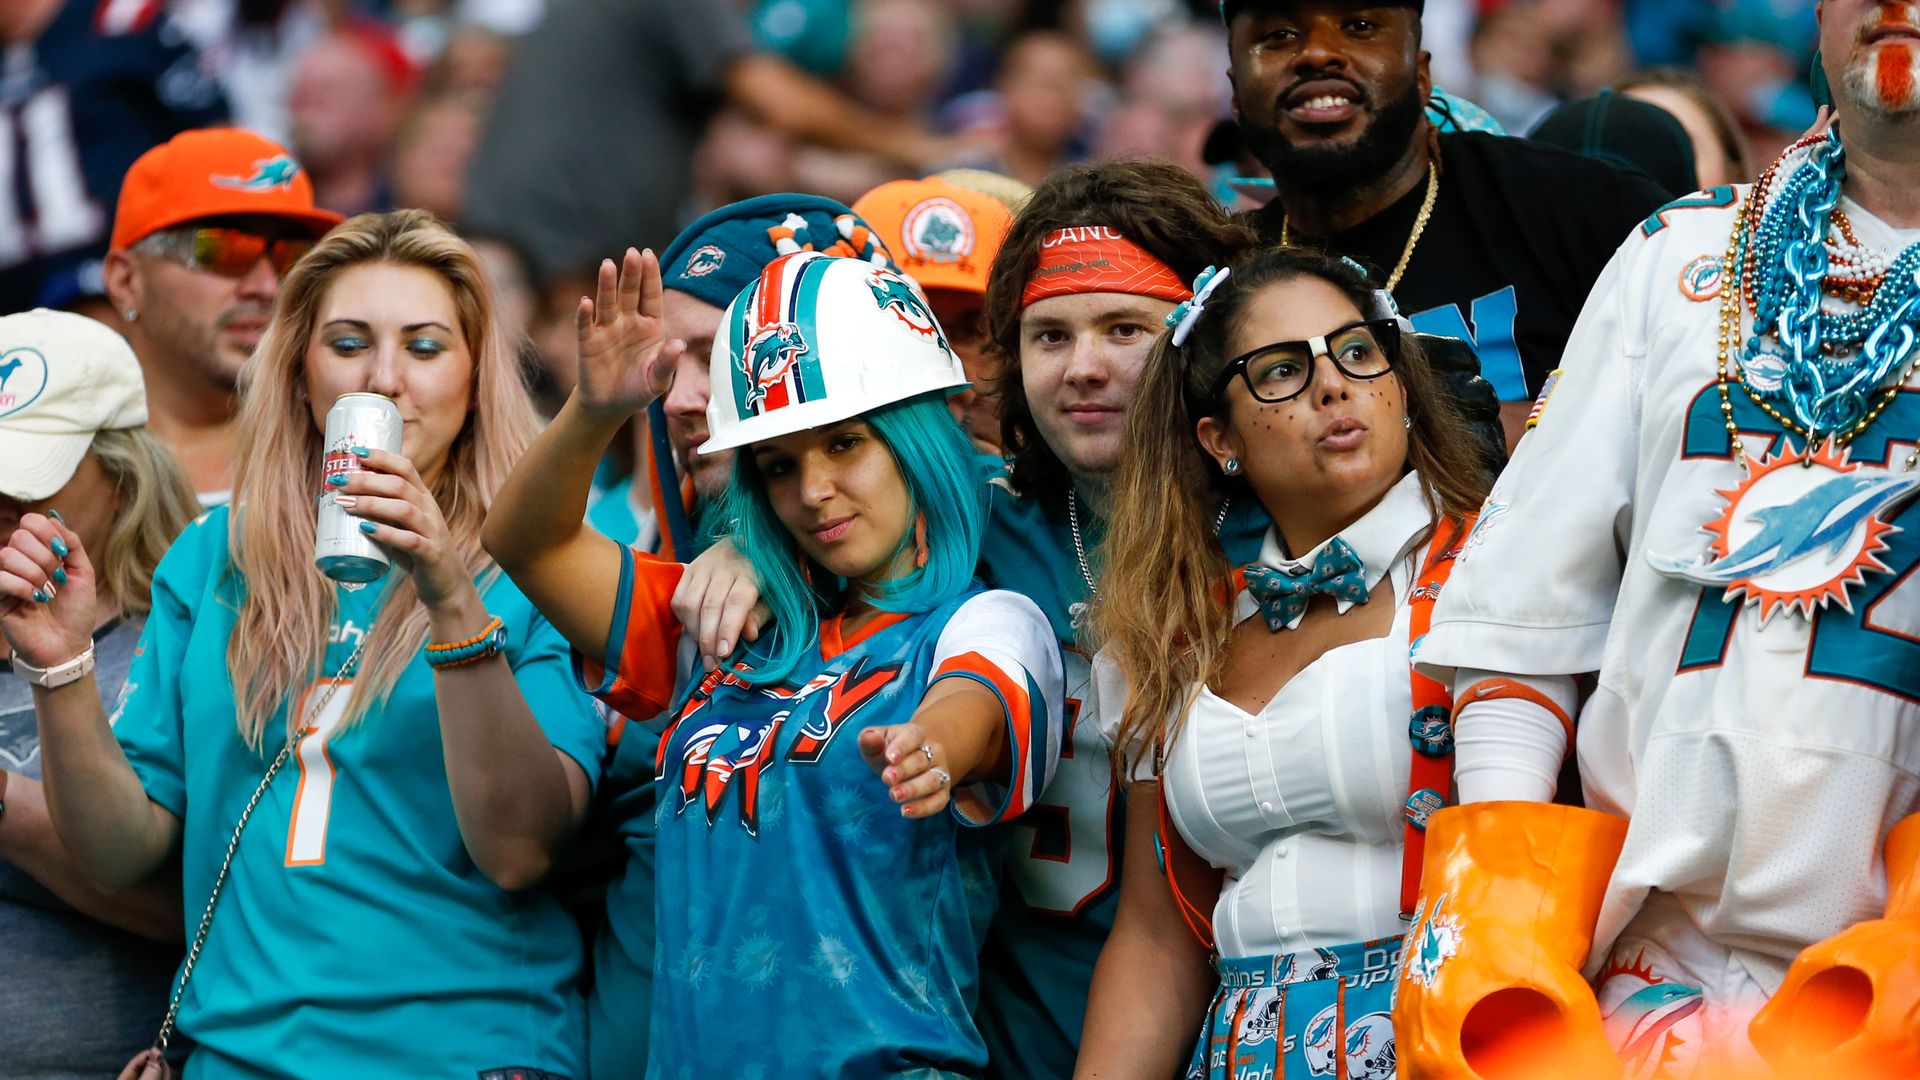 Miami Dolphins fans pose for a photo at Hard Rock Stadium during a Dolphins game.